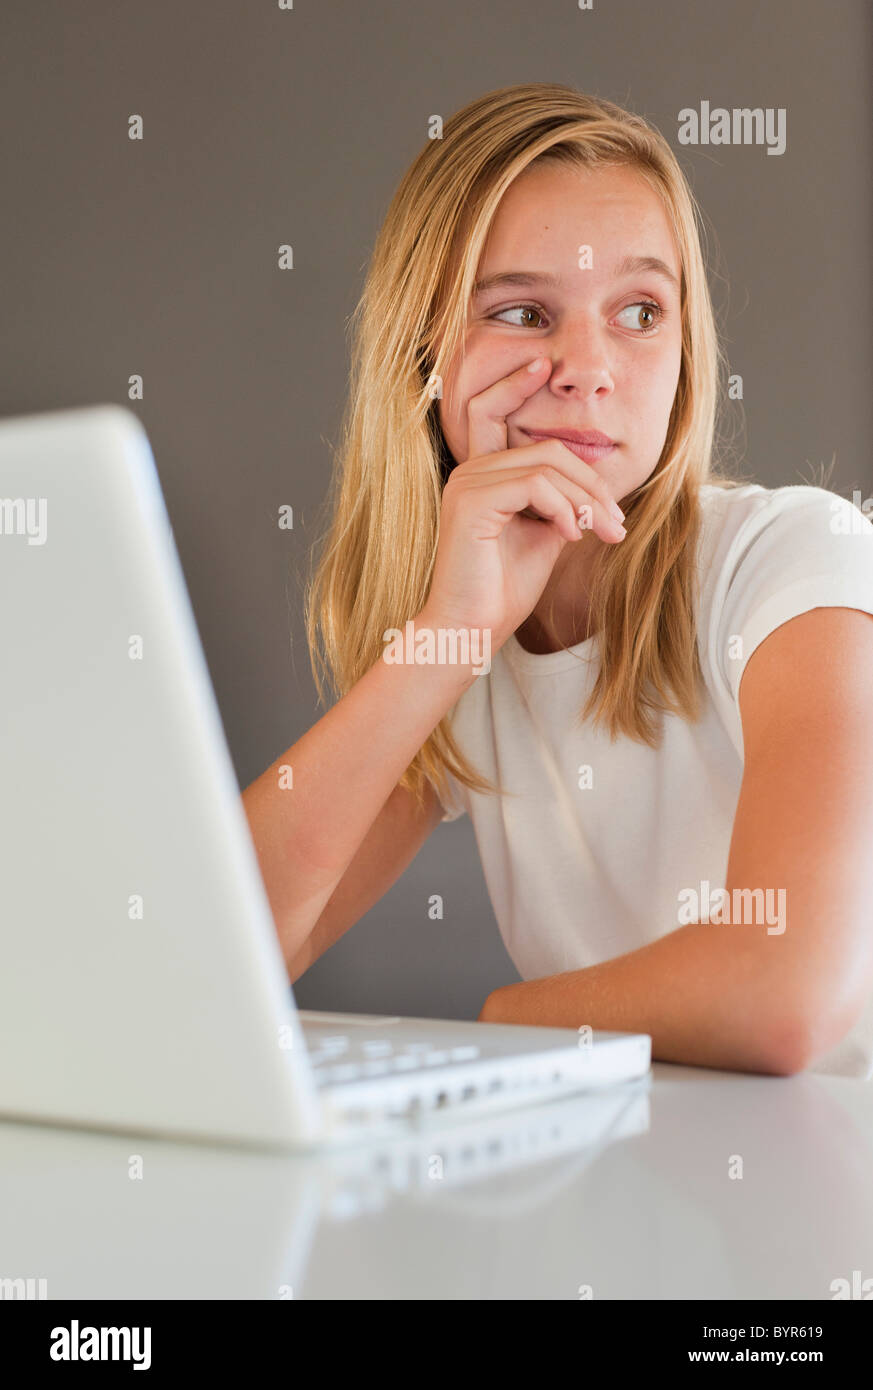 a girl in white and using a white laptop computer with a look of contemplation; benalamadena costa, malaga, andalusia, spain Stock Photo